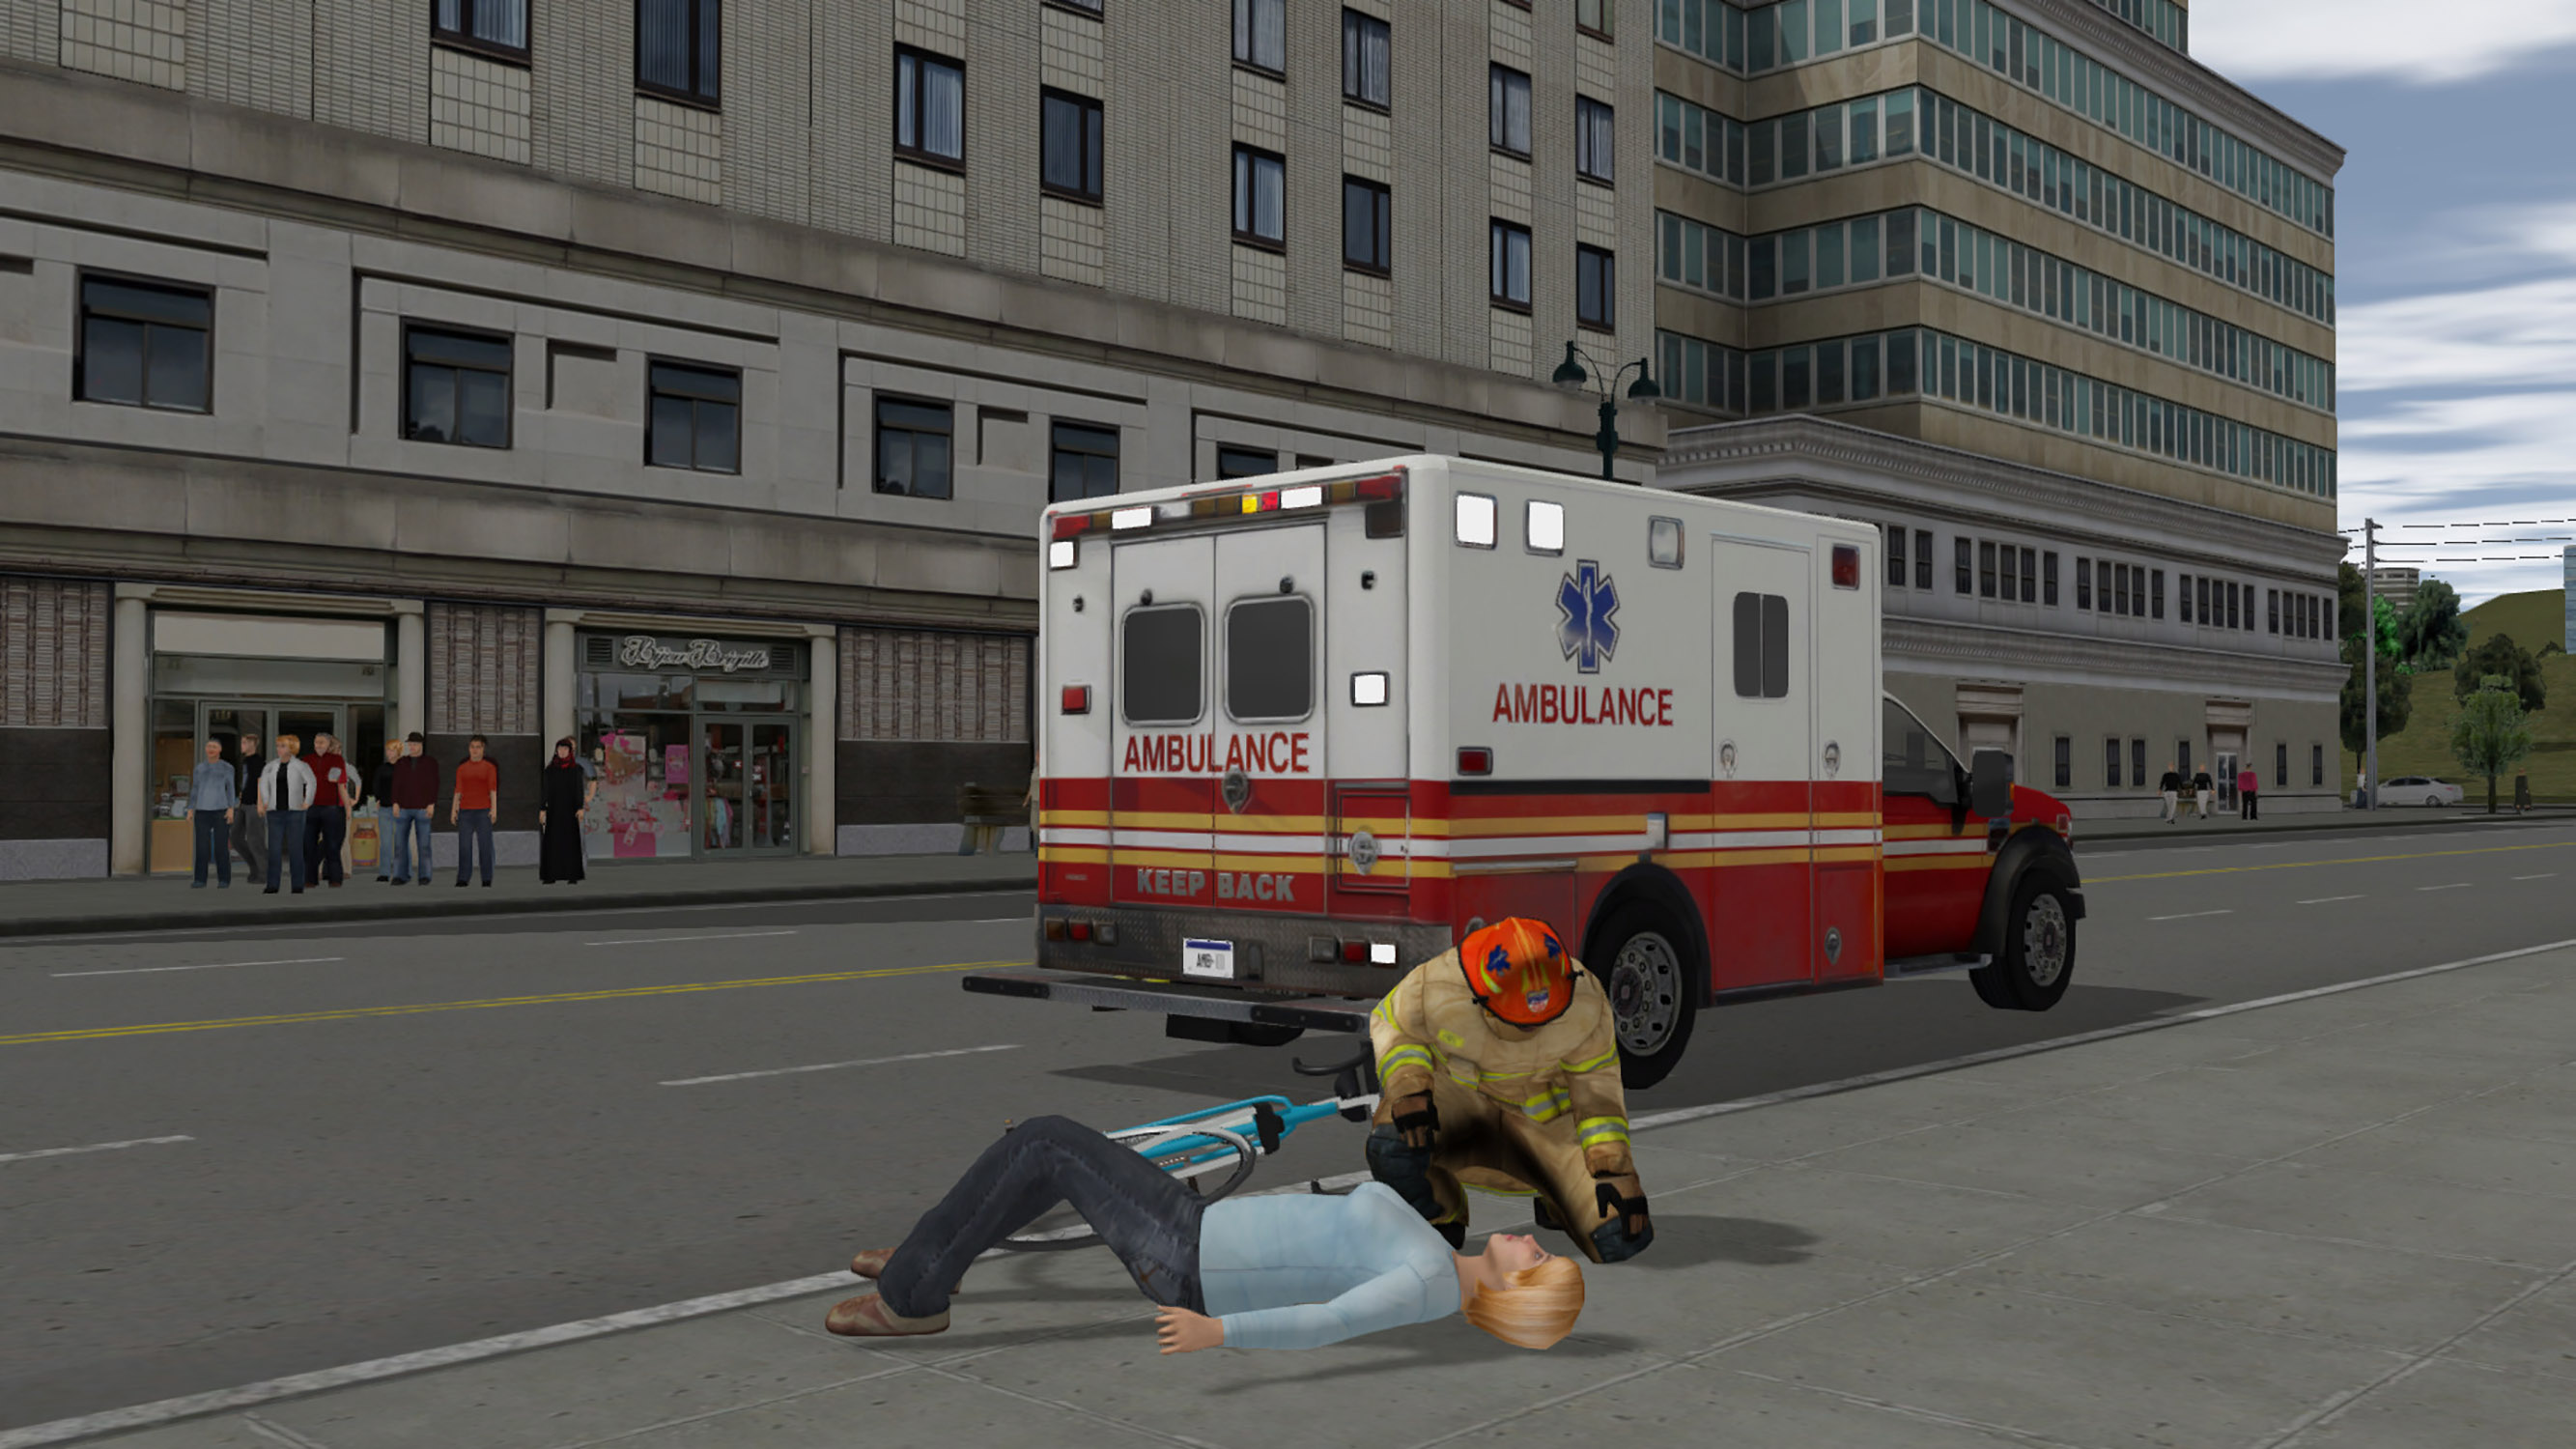 Nurse triaging and treating a casualty that got hit on her bicycle in the city.